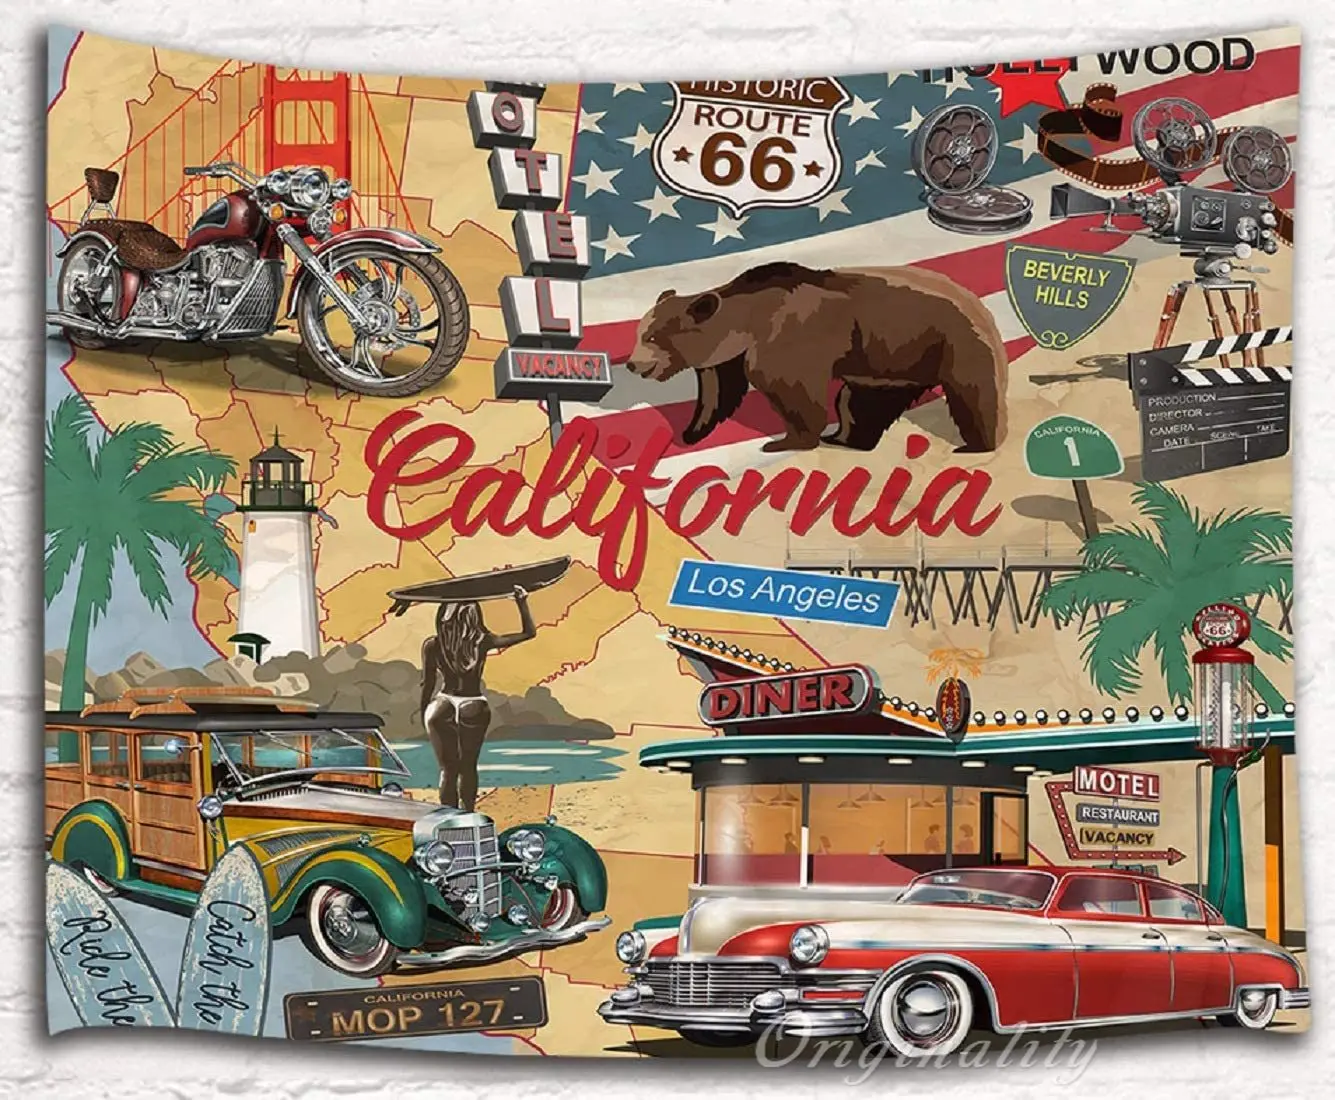 

Vintage Car California Poster Tapestry Route 66 Hollywood Wall Hanging Poster Bedroom Living Room College Dorm Room Decor